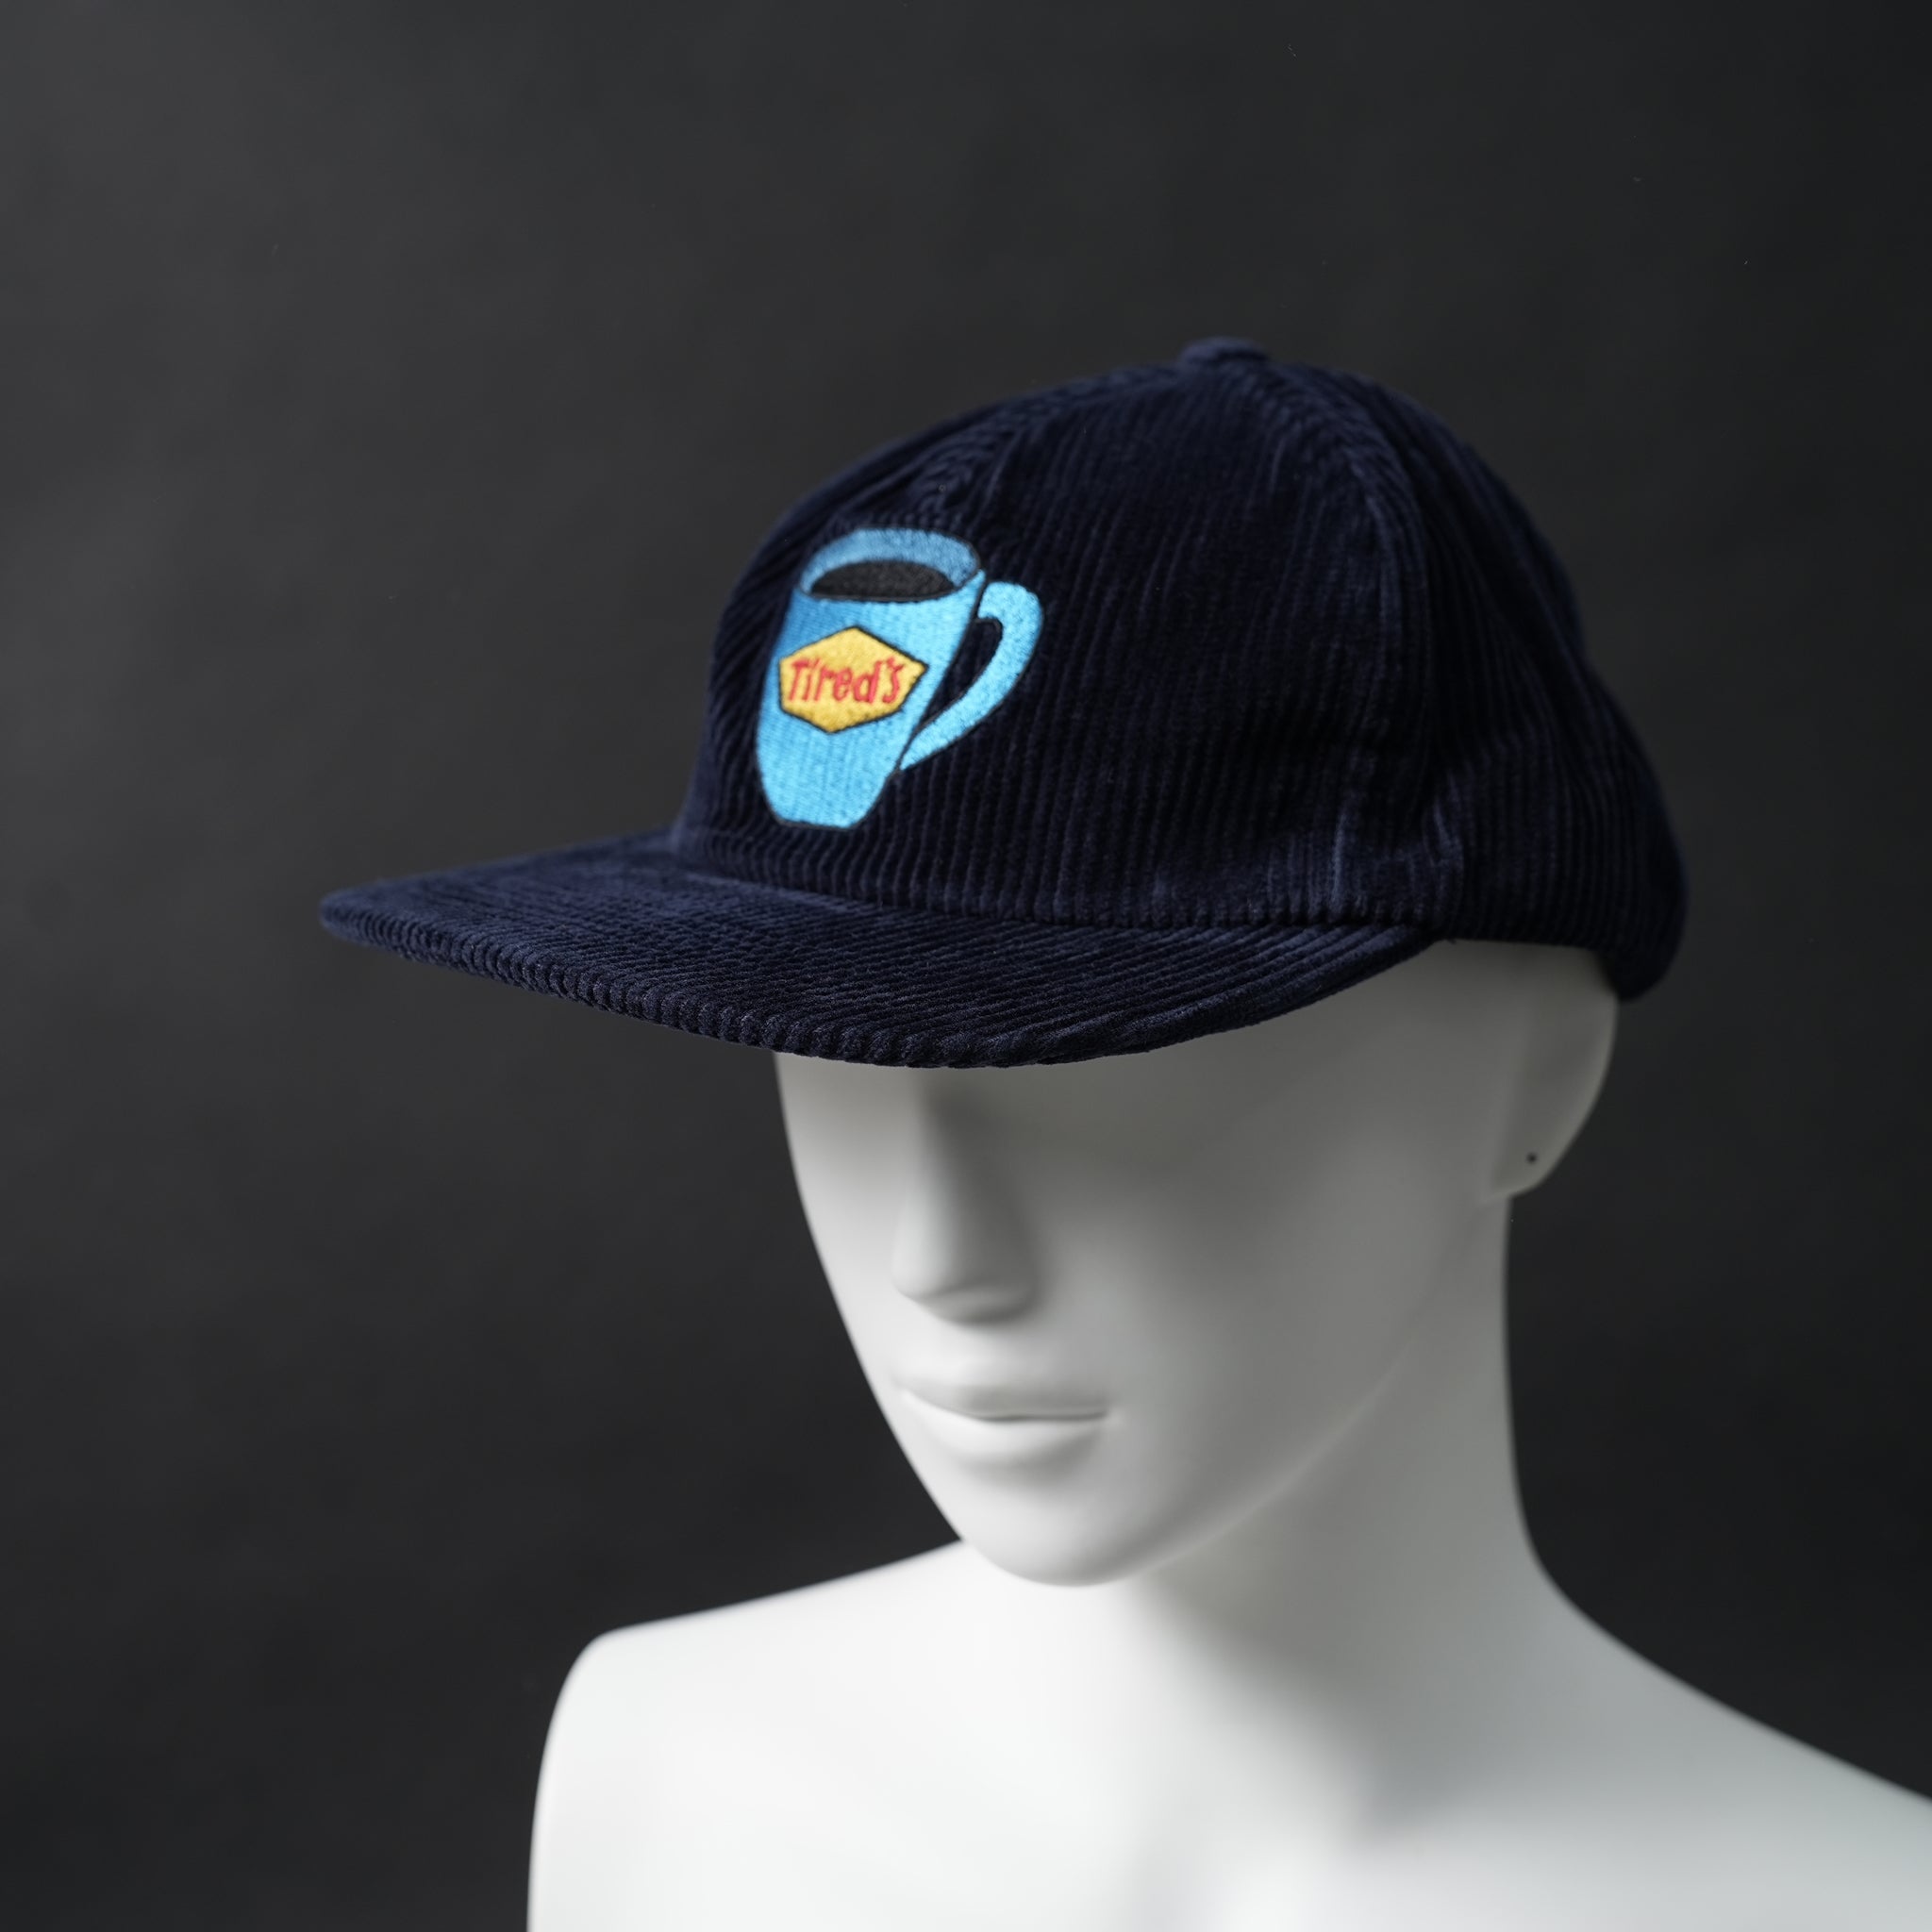 No:TS00364 | Name:TIRED'S WASHED CORD CAP | Color:Navy【TIRED_タイレッド】